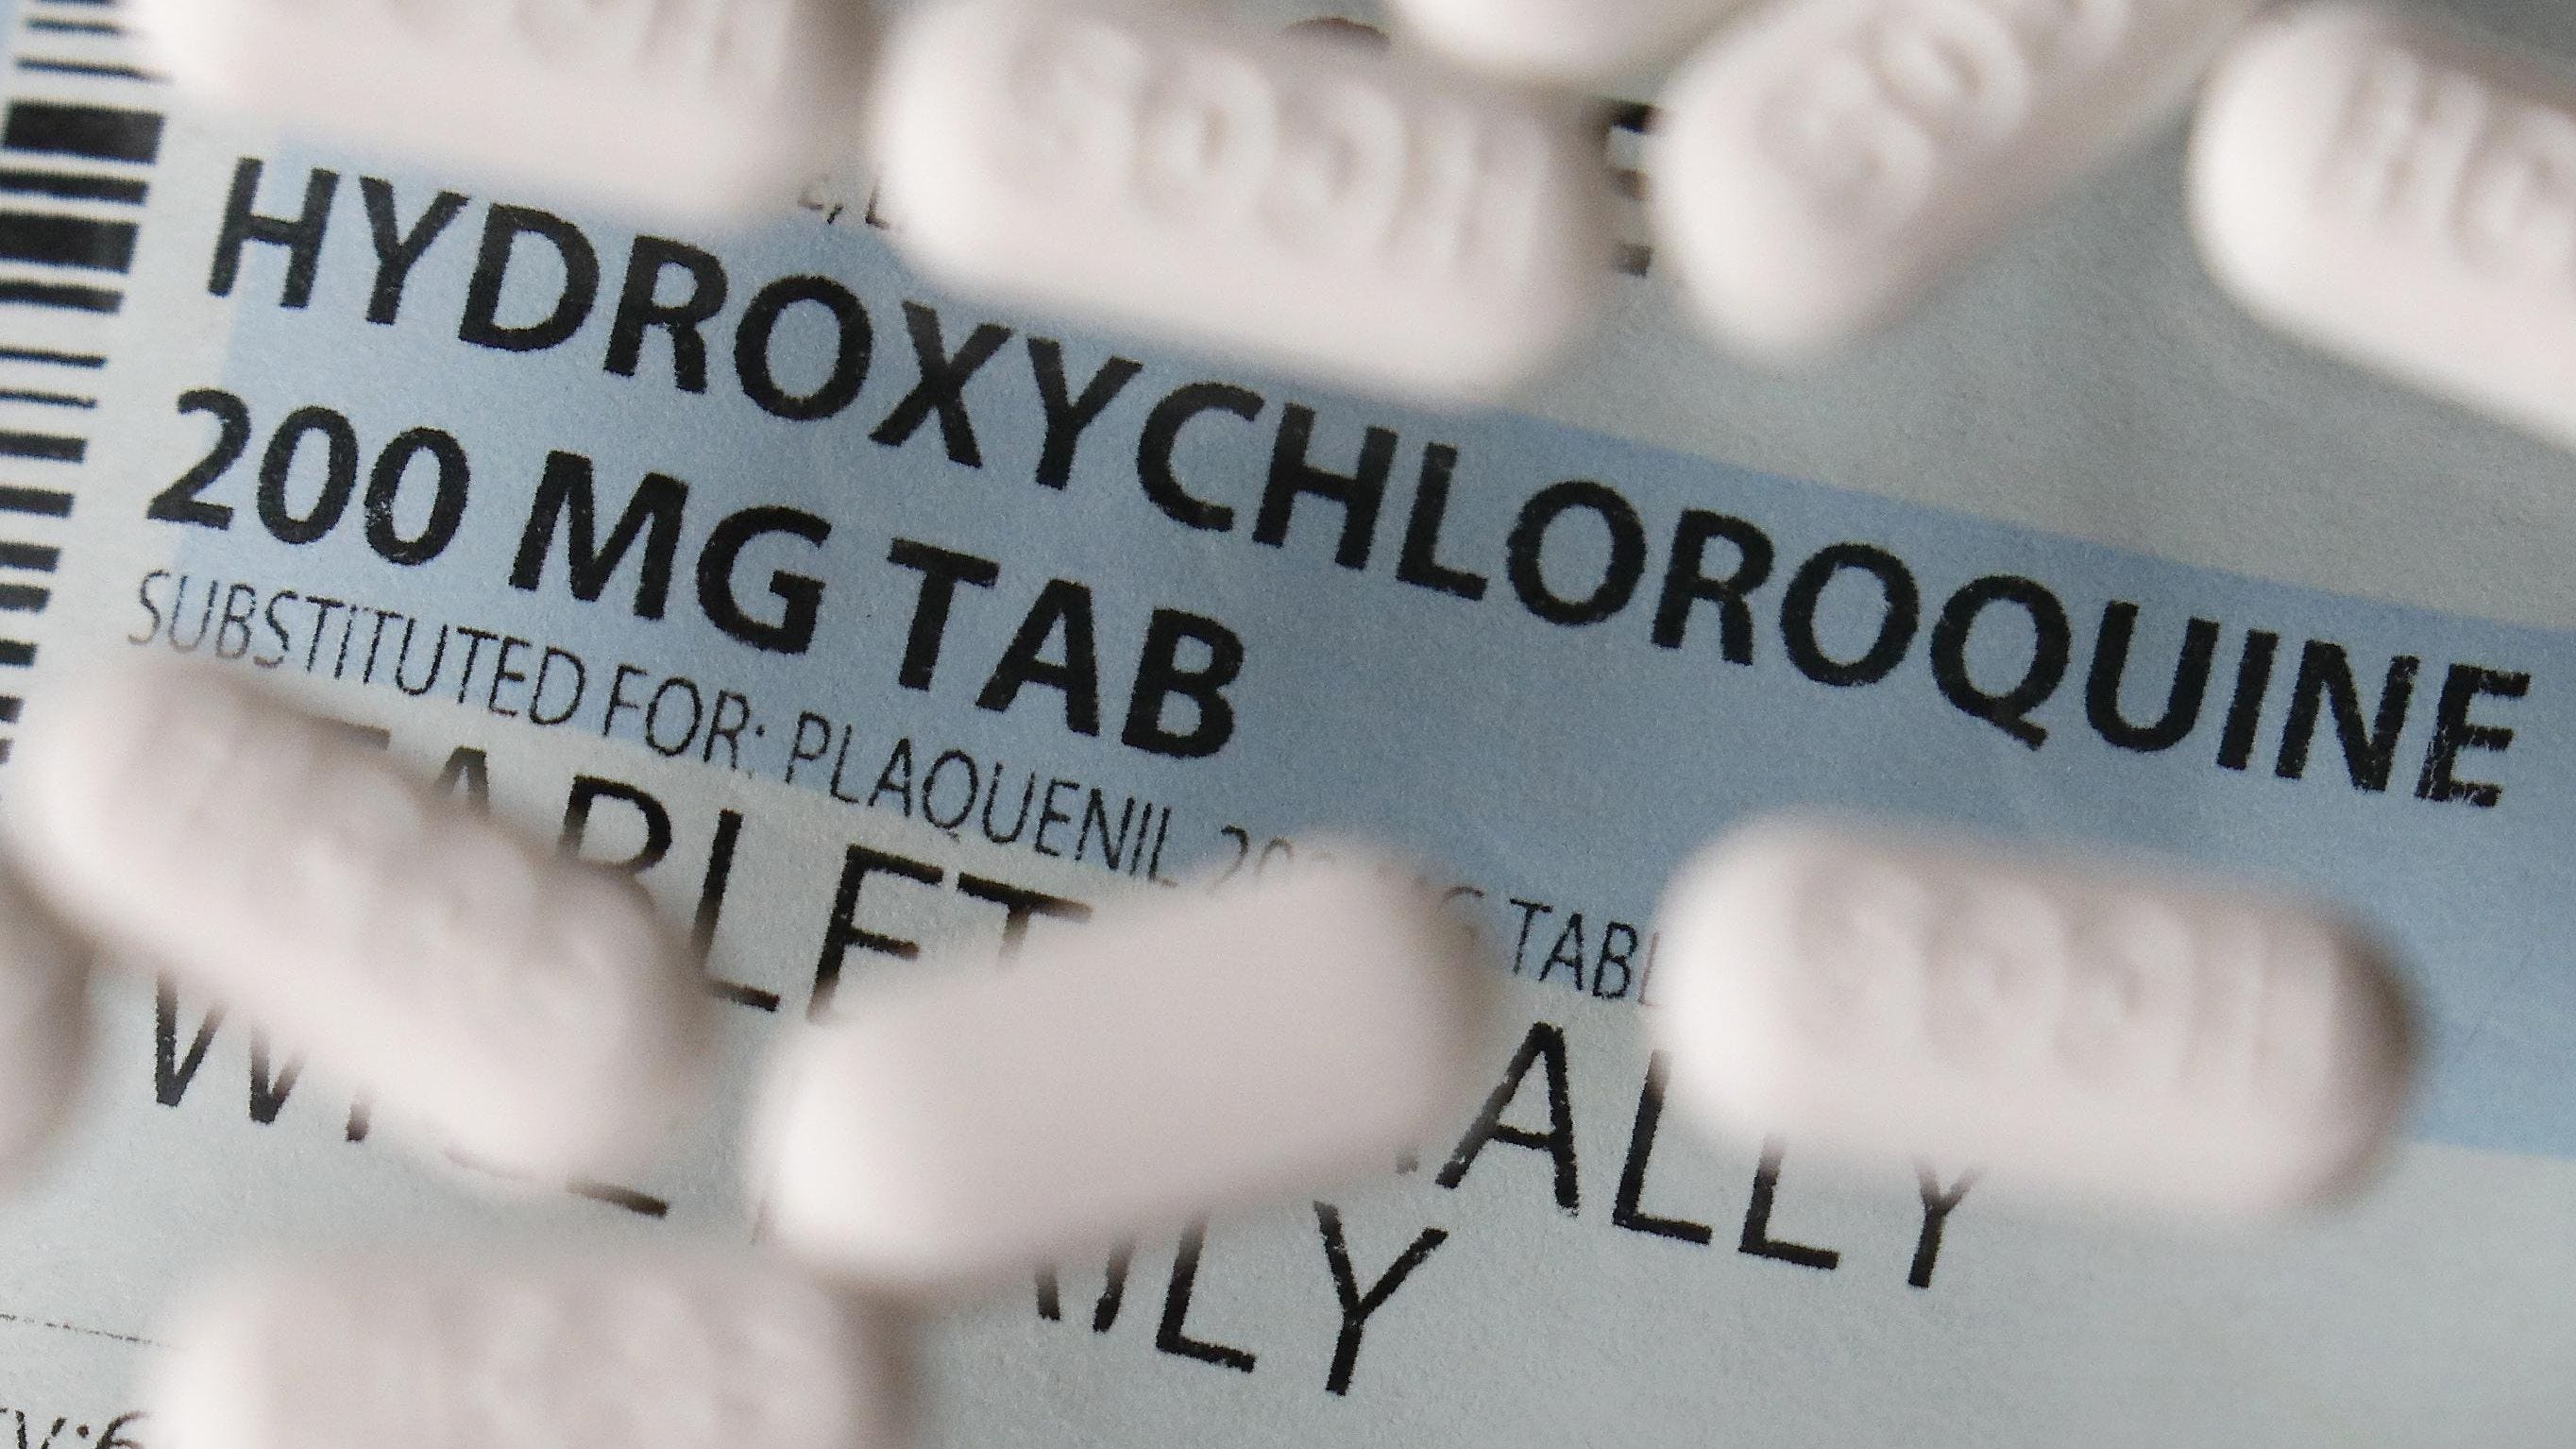 Some NJ COVID patients benefit from hydroxychloroquine, study shows